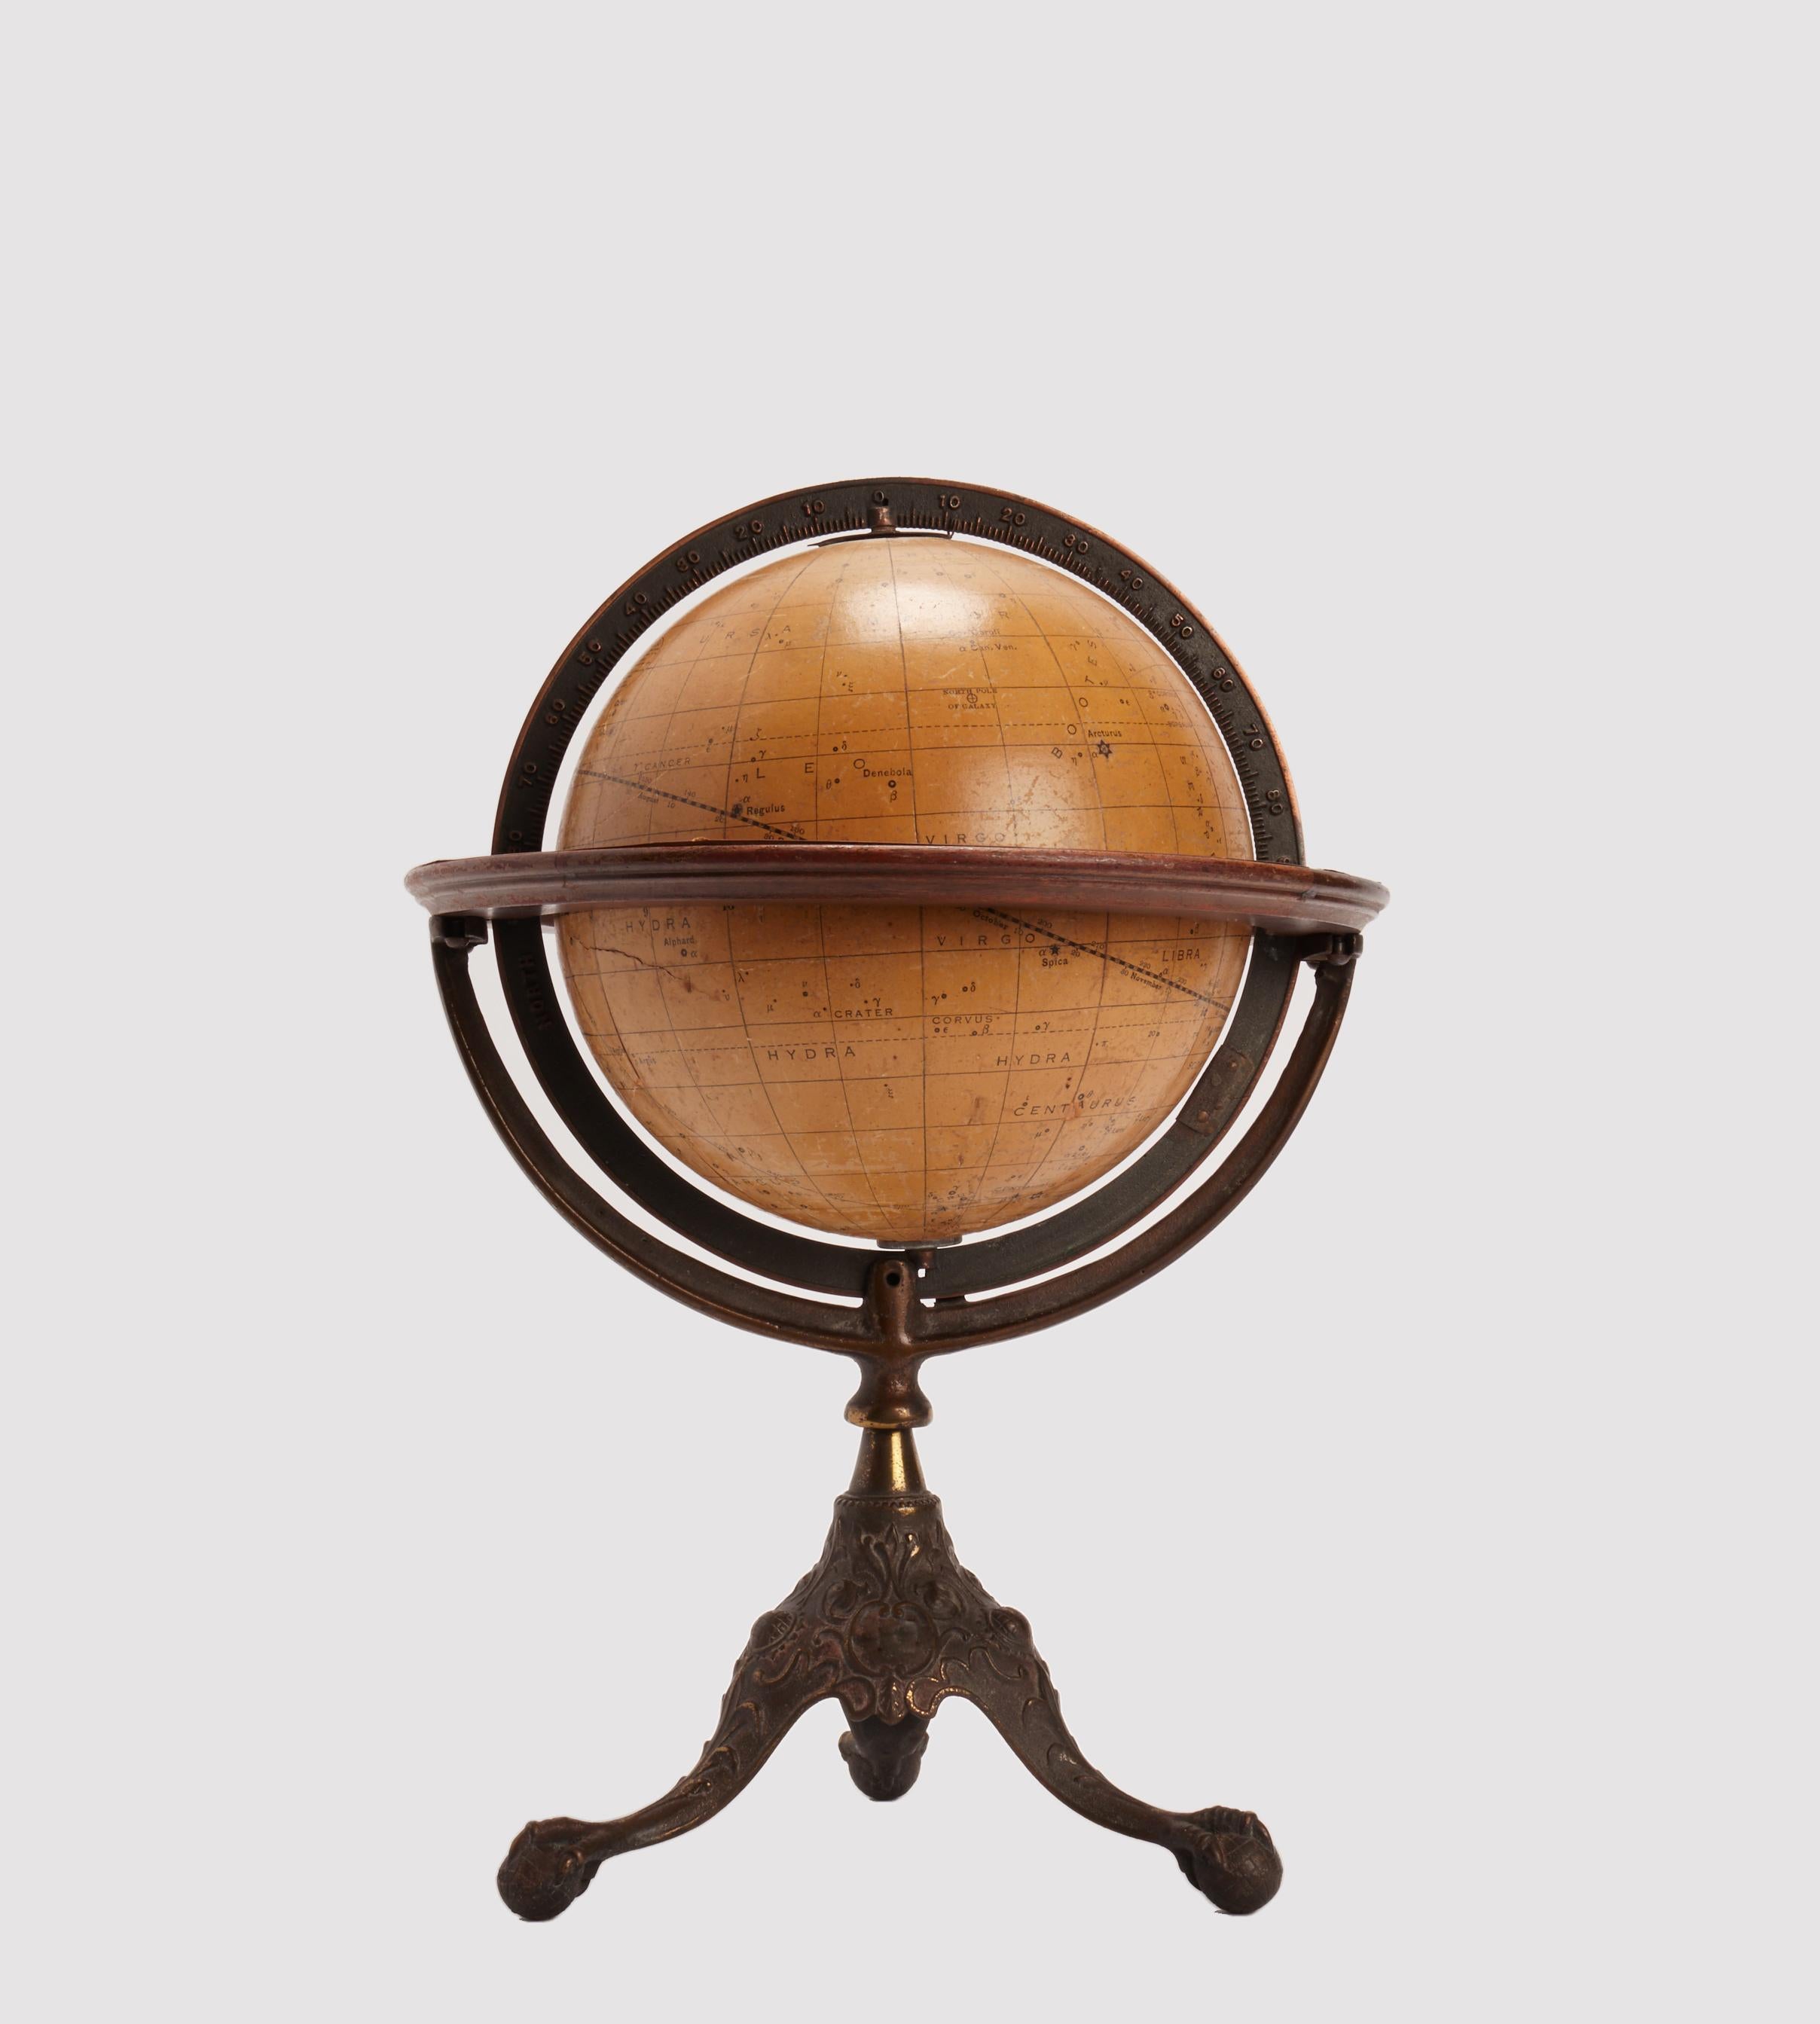 American paper mâché celestial globe, wooden horizon circle, cast iron tripod. Showing the positions of the principal stars and circles, by John Duncan, professor of astronomy, maker: Rand Mc. Nelly and co. USA, circa 1900.